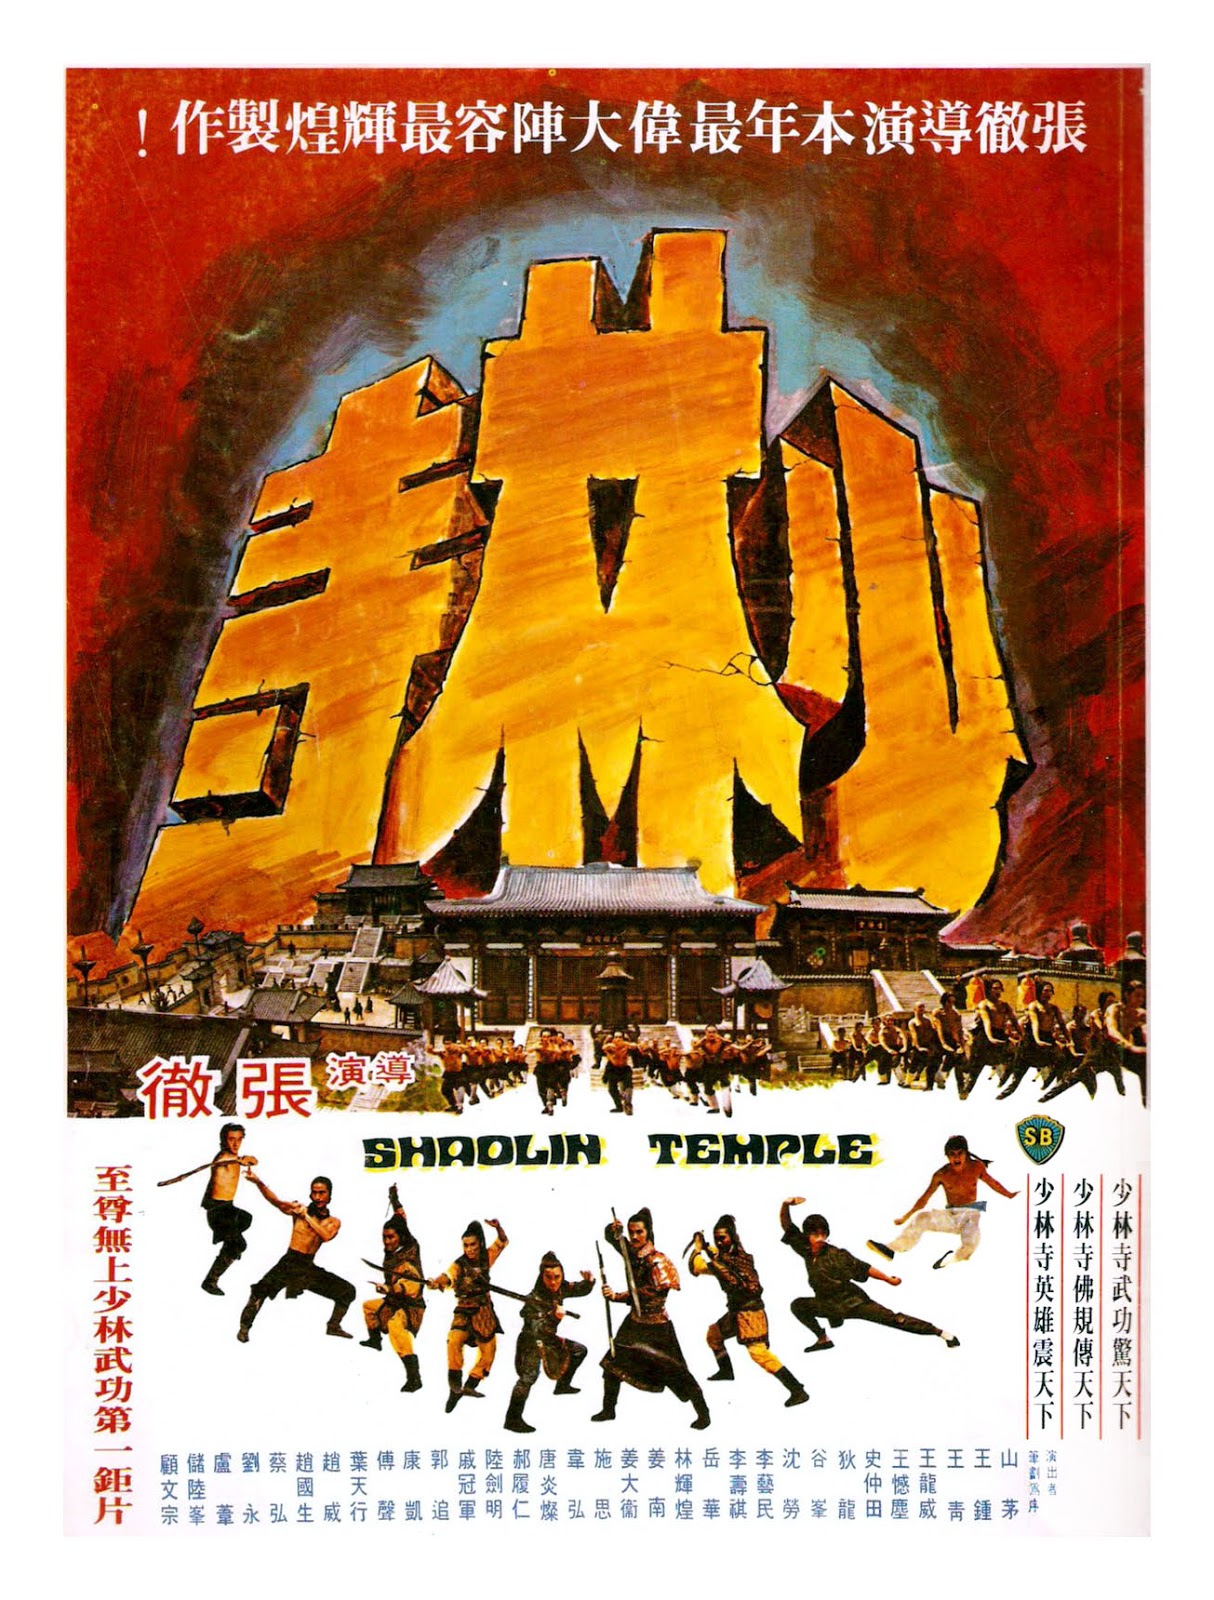 shaolin temple poster